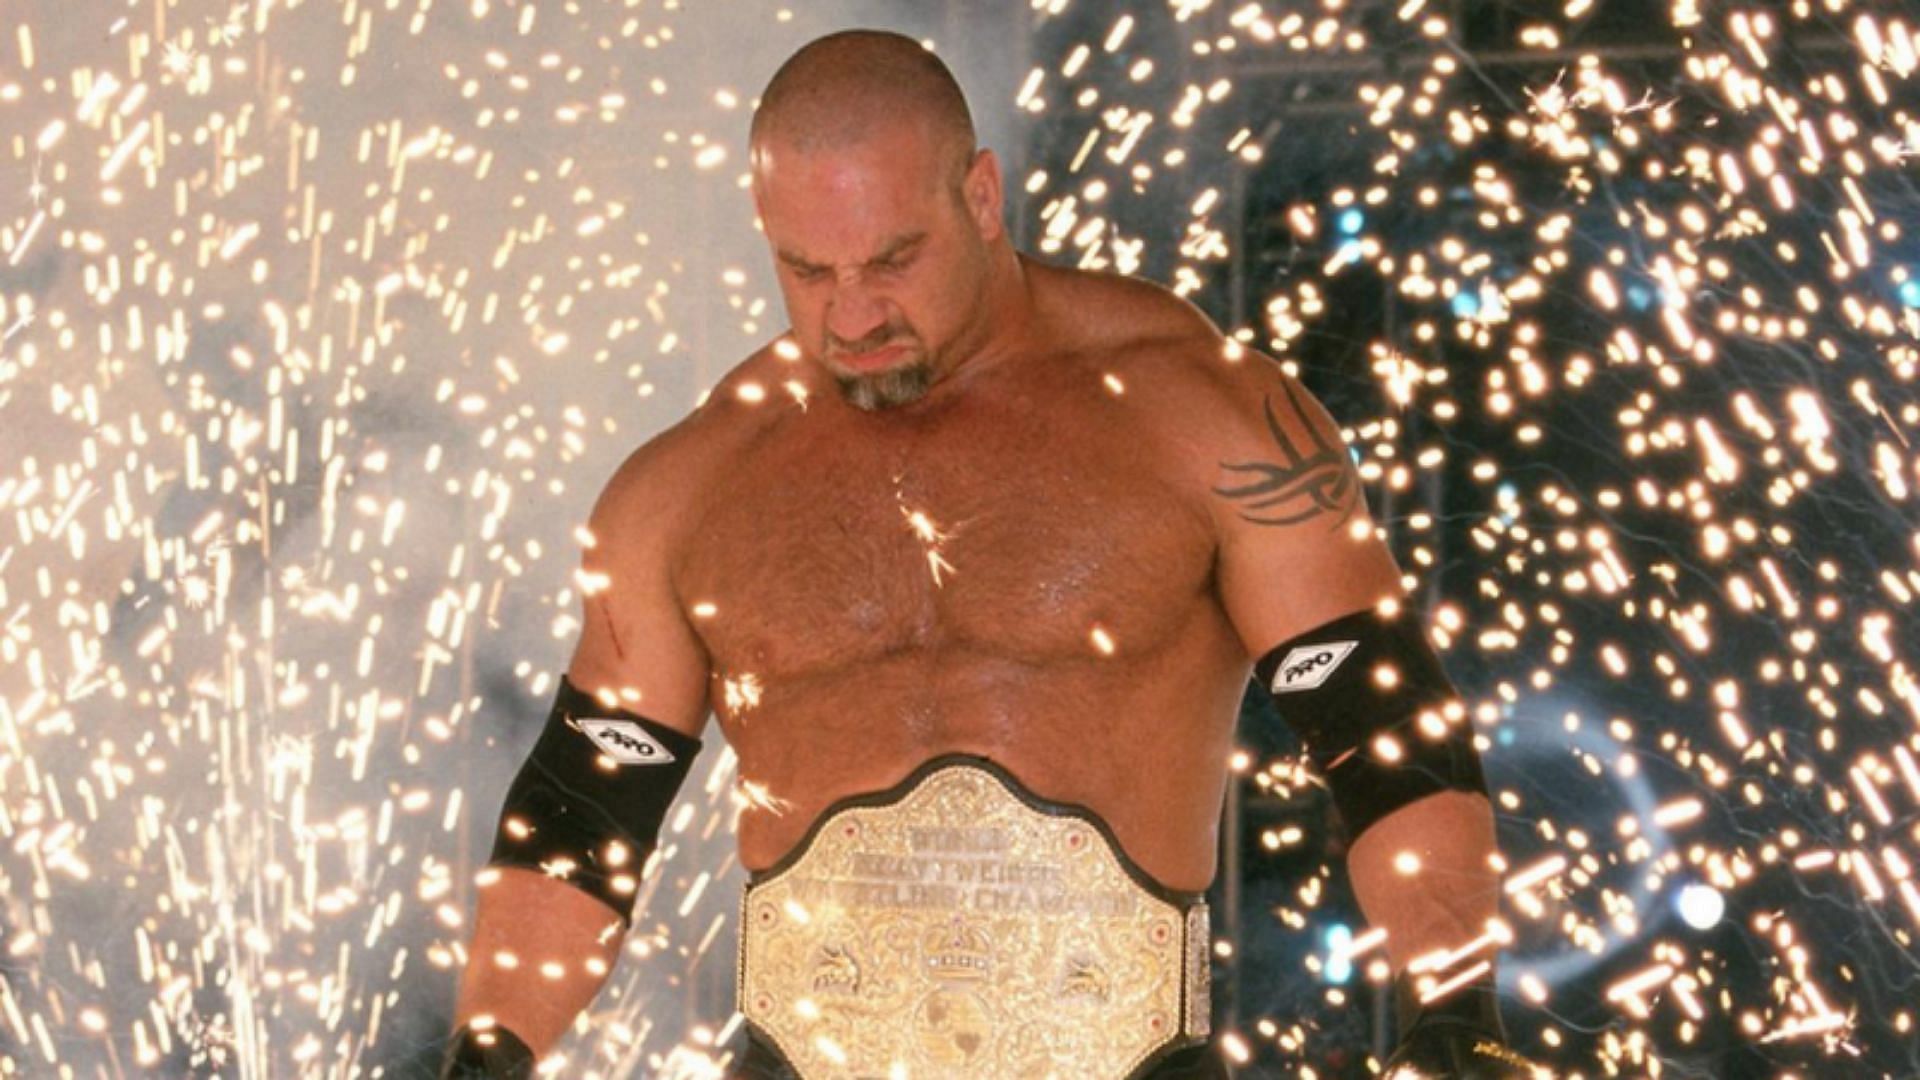 Goldberg dropping the WCW Championship to Kevin Nash came as a shock to many.